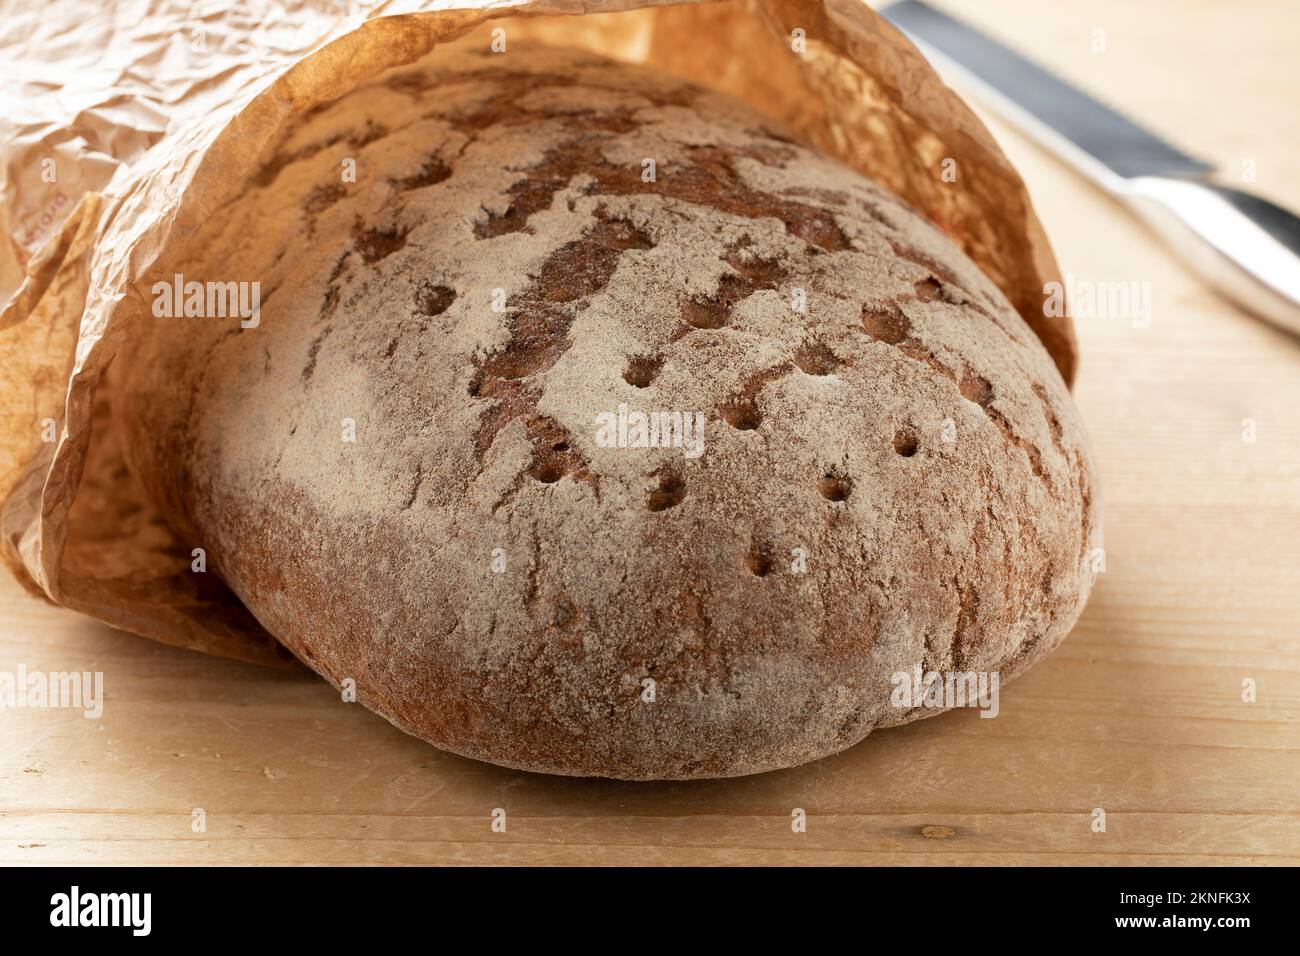 Whole German sourdough loaf of bread in a paper bag close up Stock Photo